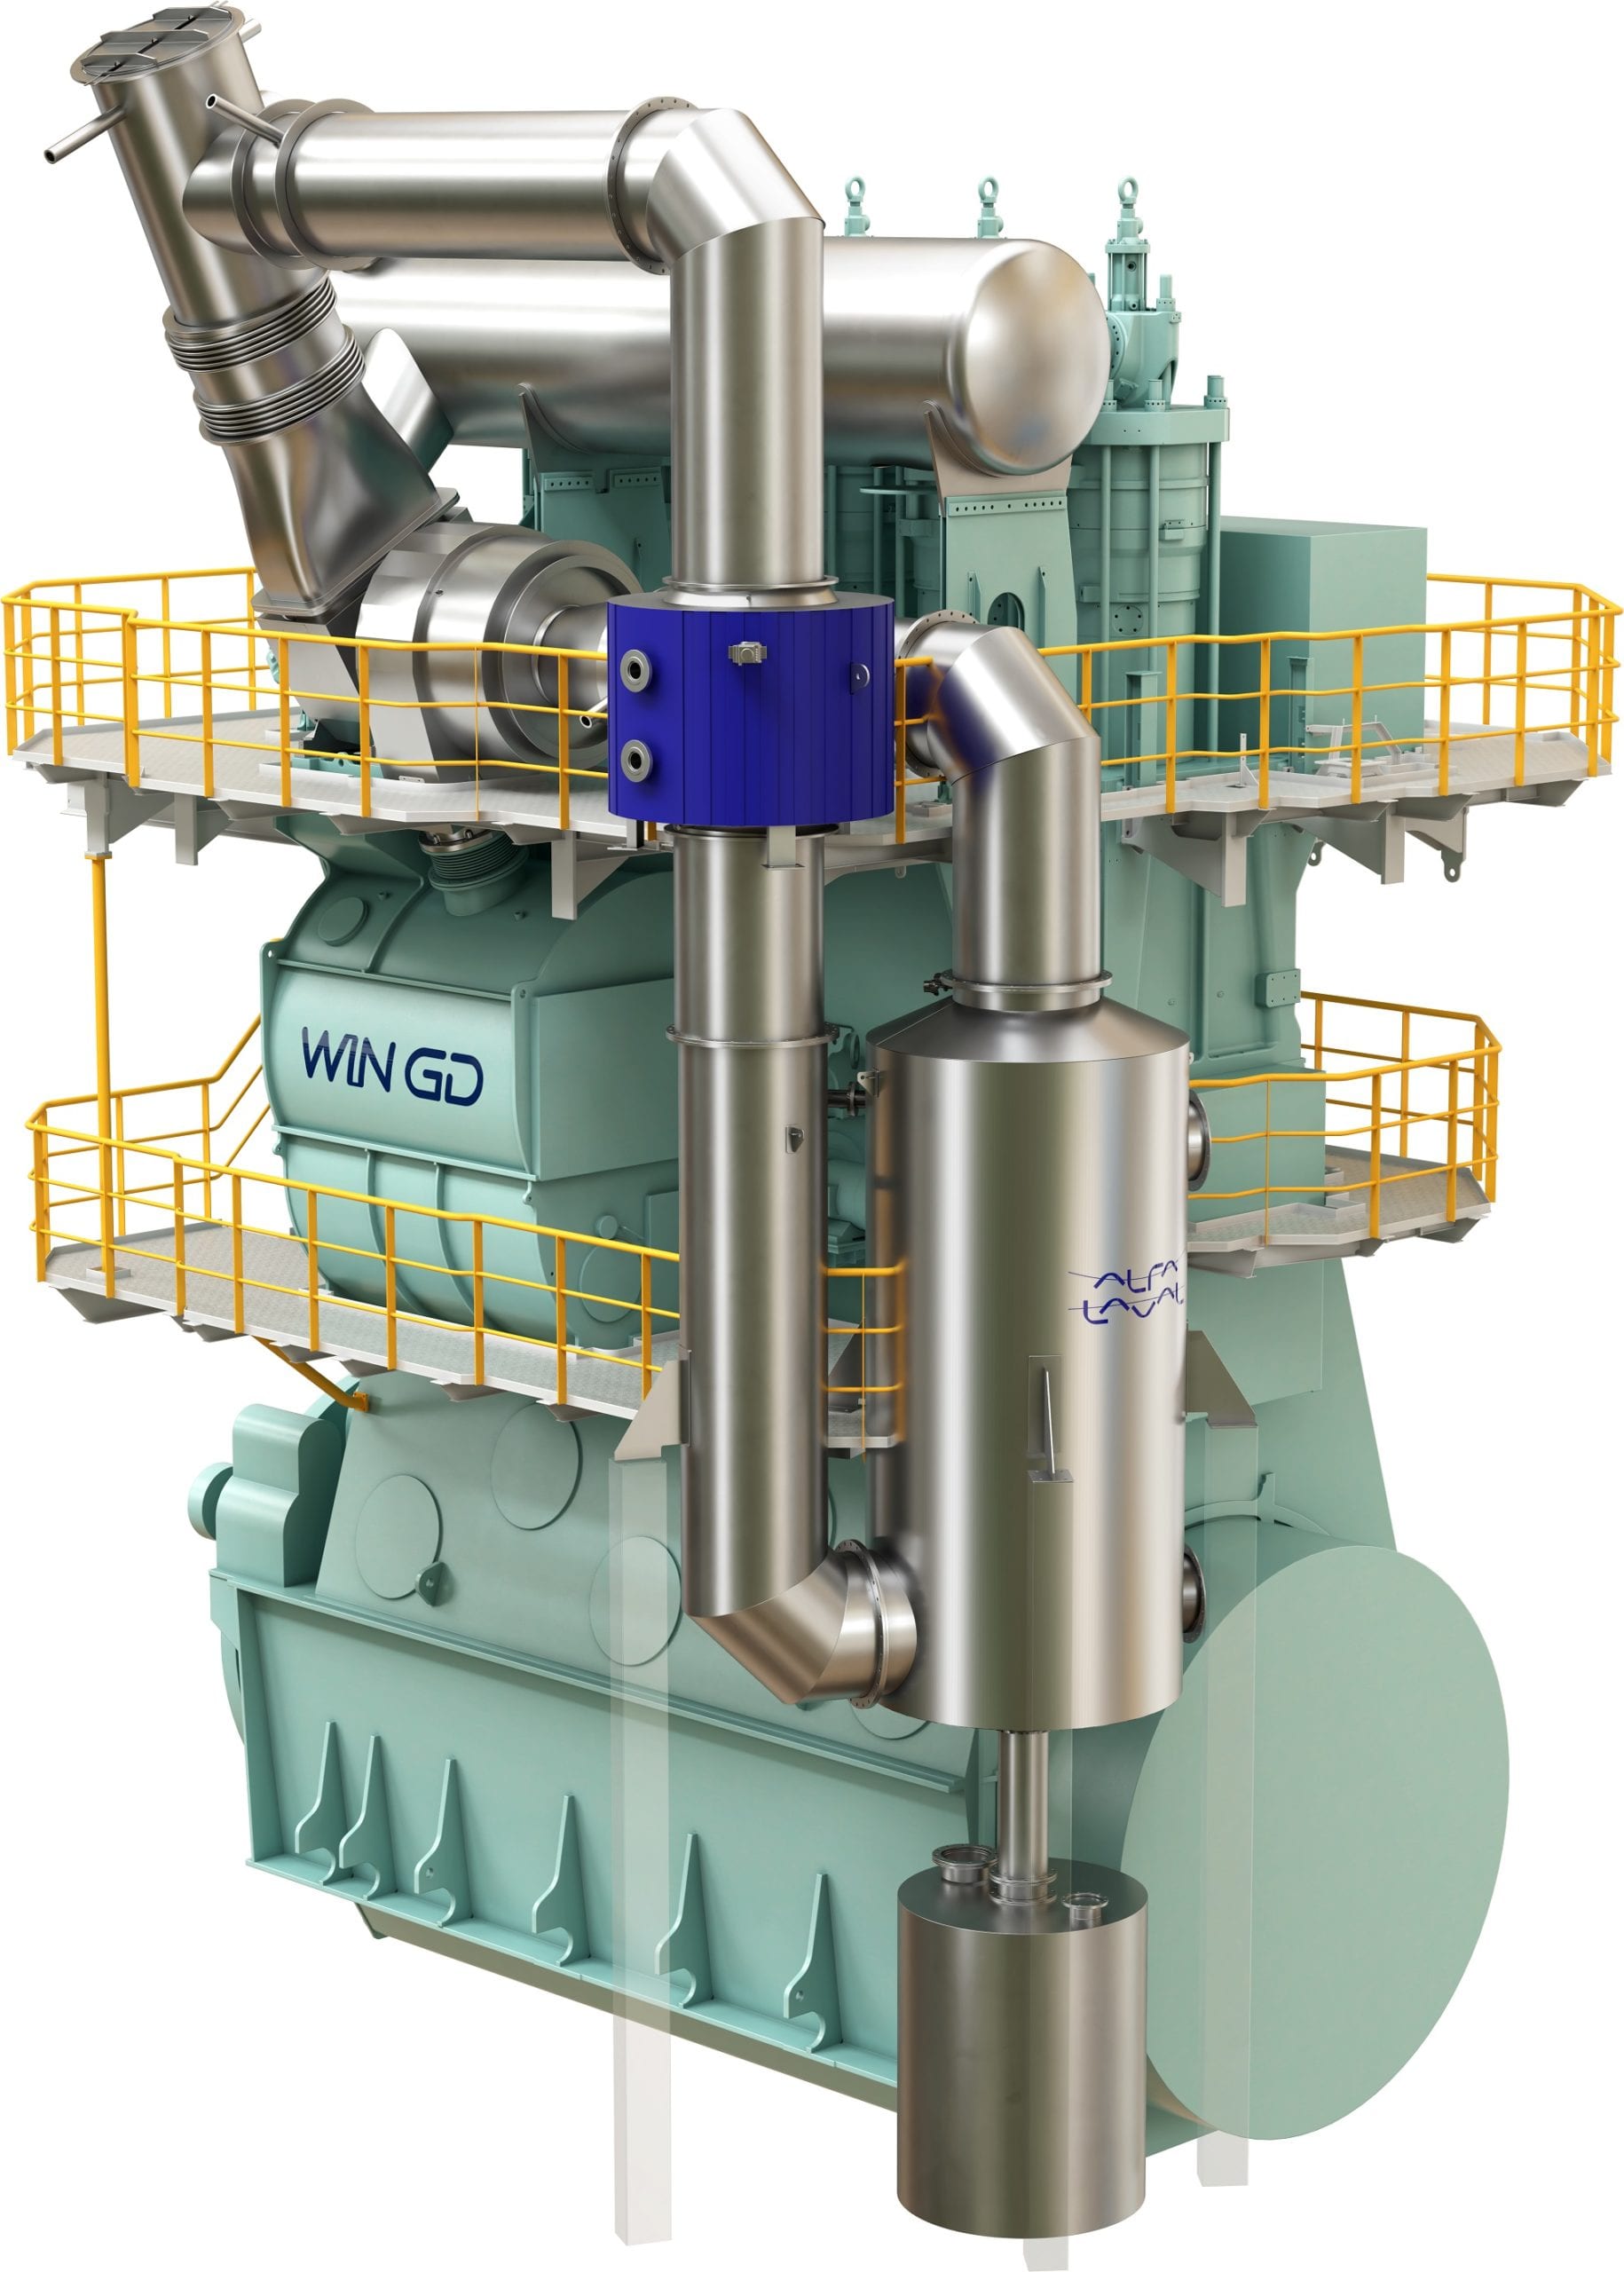 New Alfa Laval PureCool, developed with engine designer WinGD, enables up to 50% methane slip reduction